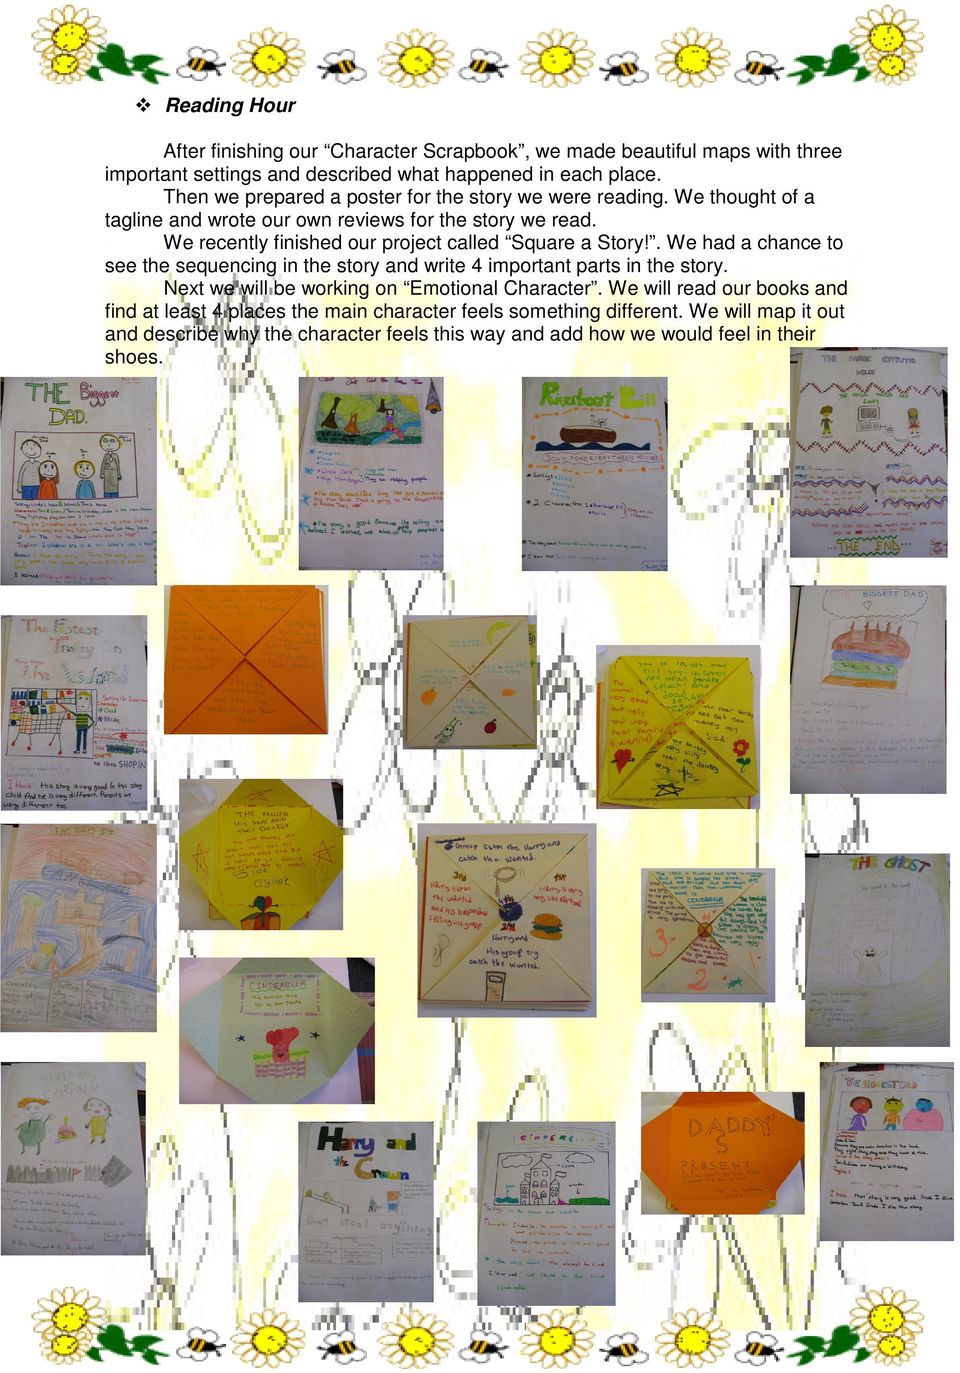 We recently finished our project called Square a Story!. We had a chance to see the sequencing in the story and write 4 important parts in the story.